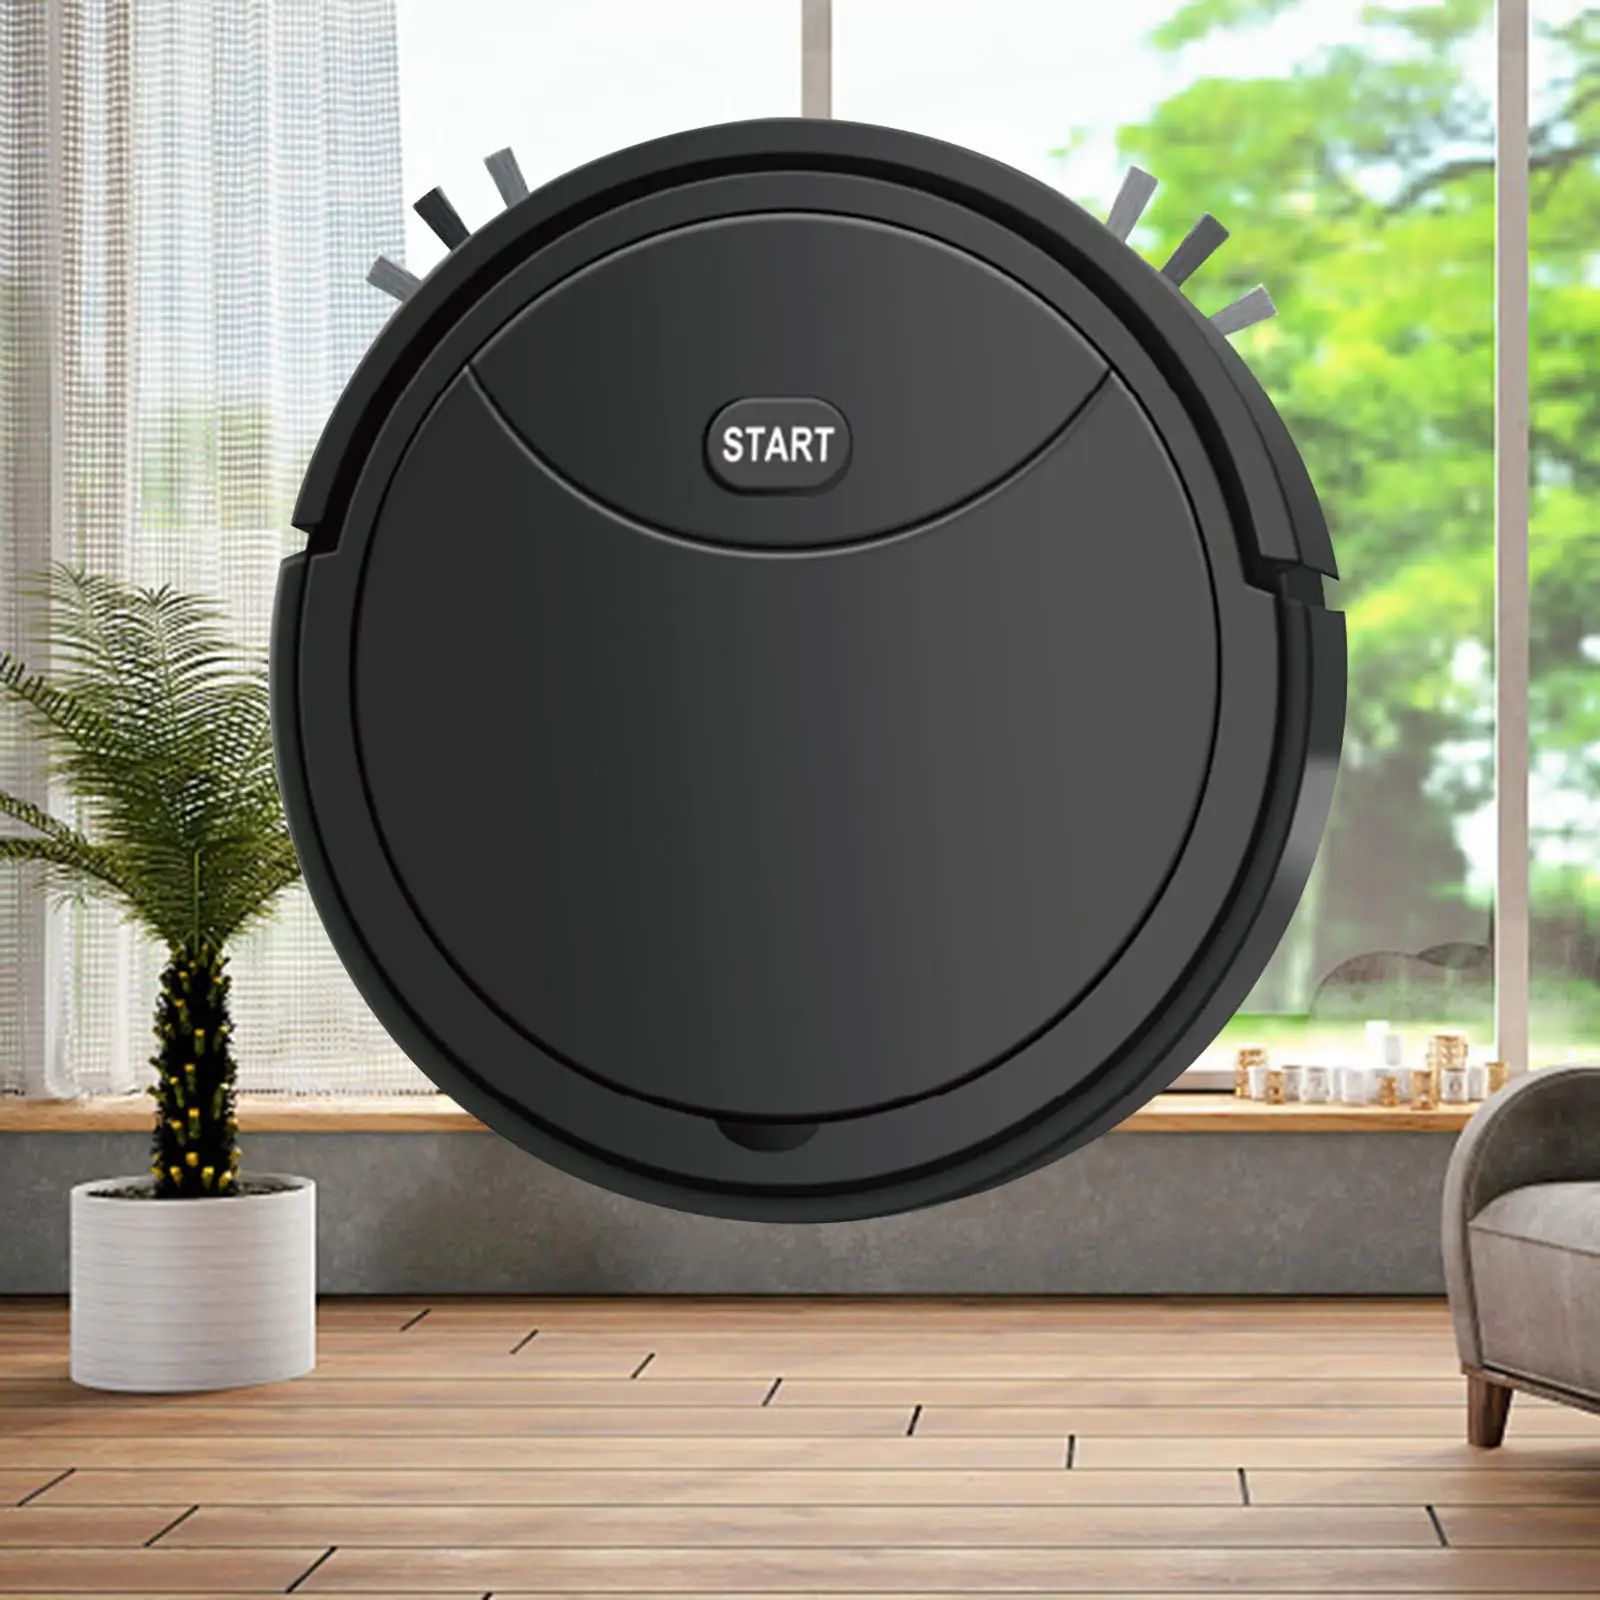 Robot Vacuum Cleaner Electric Sweeper 90 Mins Runtime Strong Suction Quiet 3 in 1 Robotic Vacuum for Tile Floor